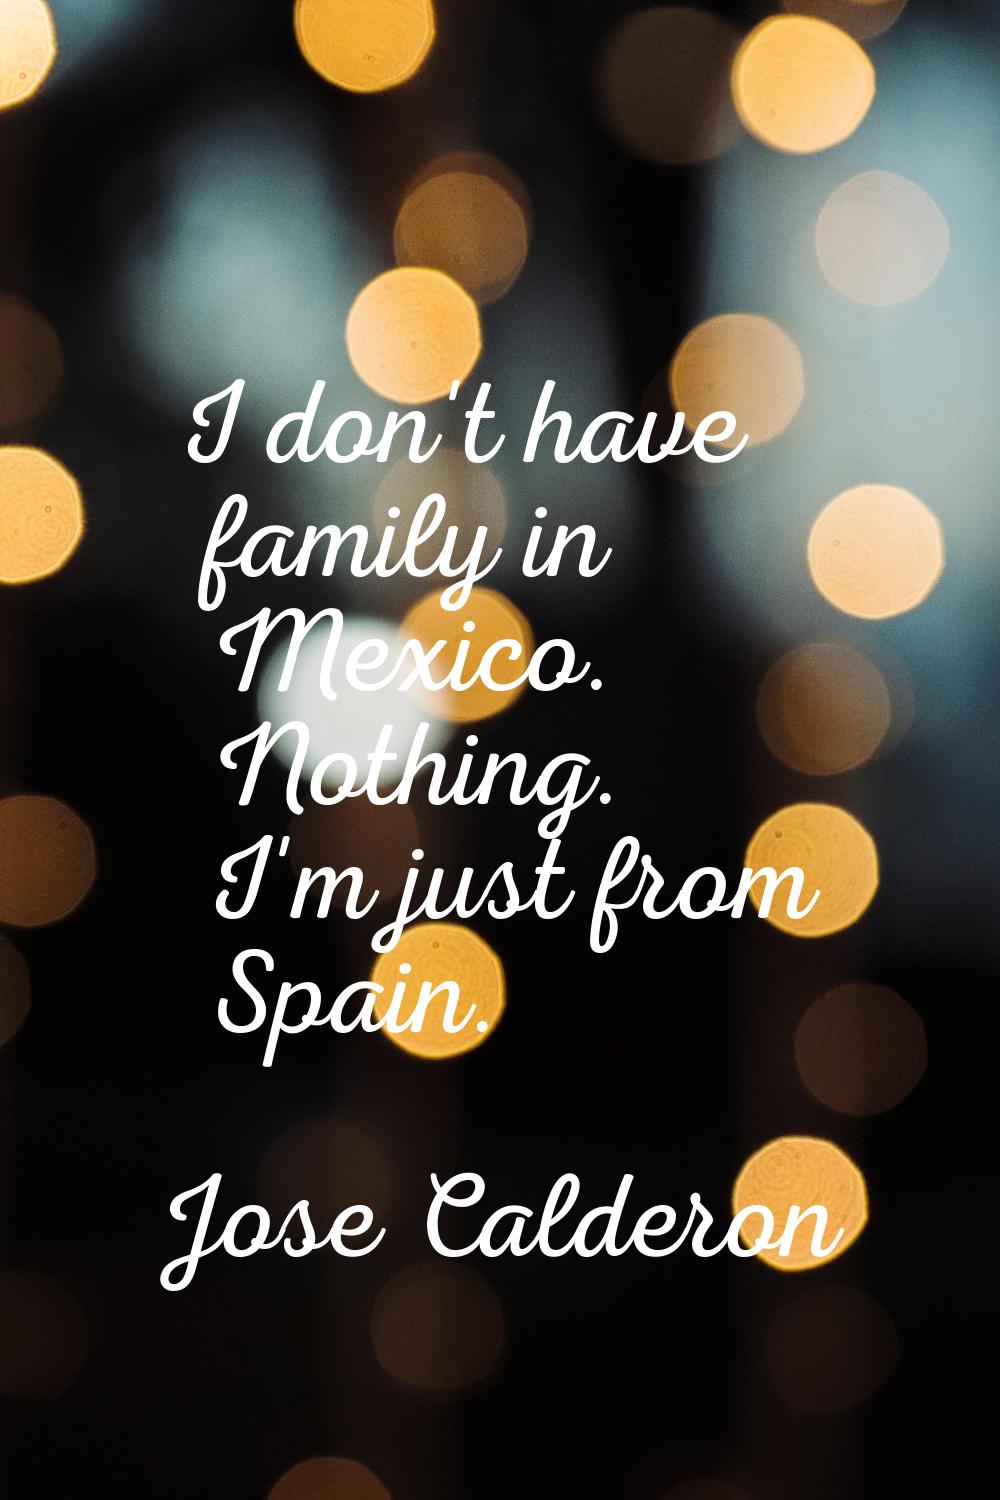 I don't have family in Mexico. Nothing. I'm just from Spain.